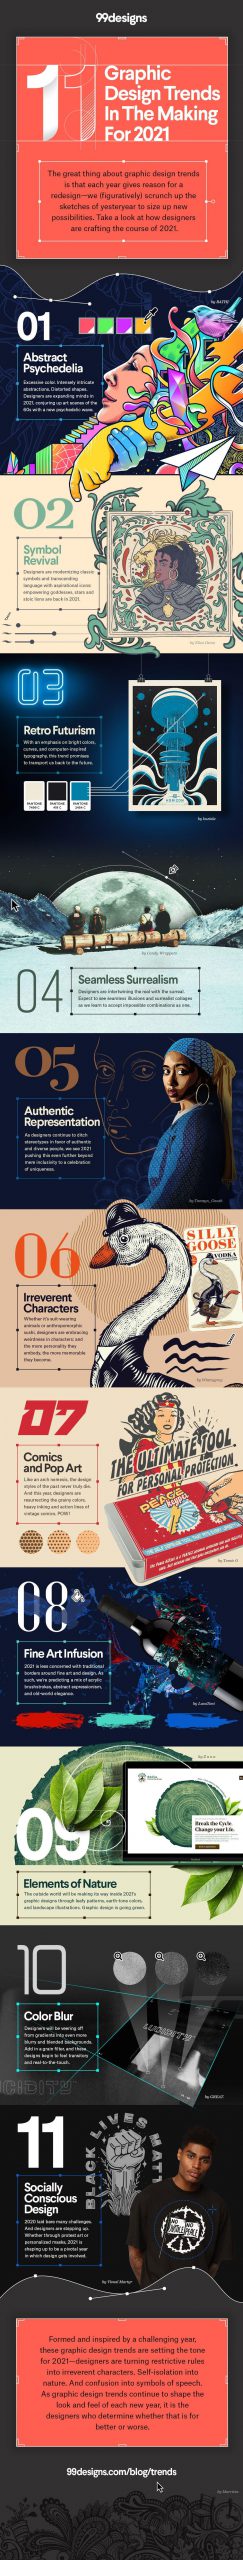 11 graphic design trends for 2021 infographic scaled 1